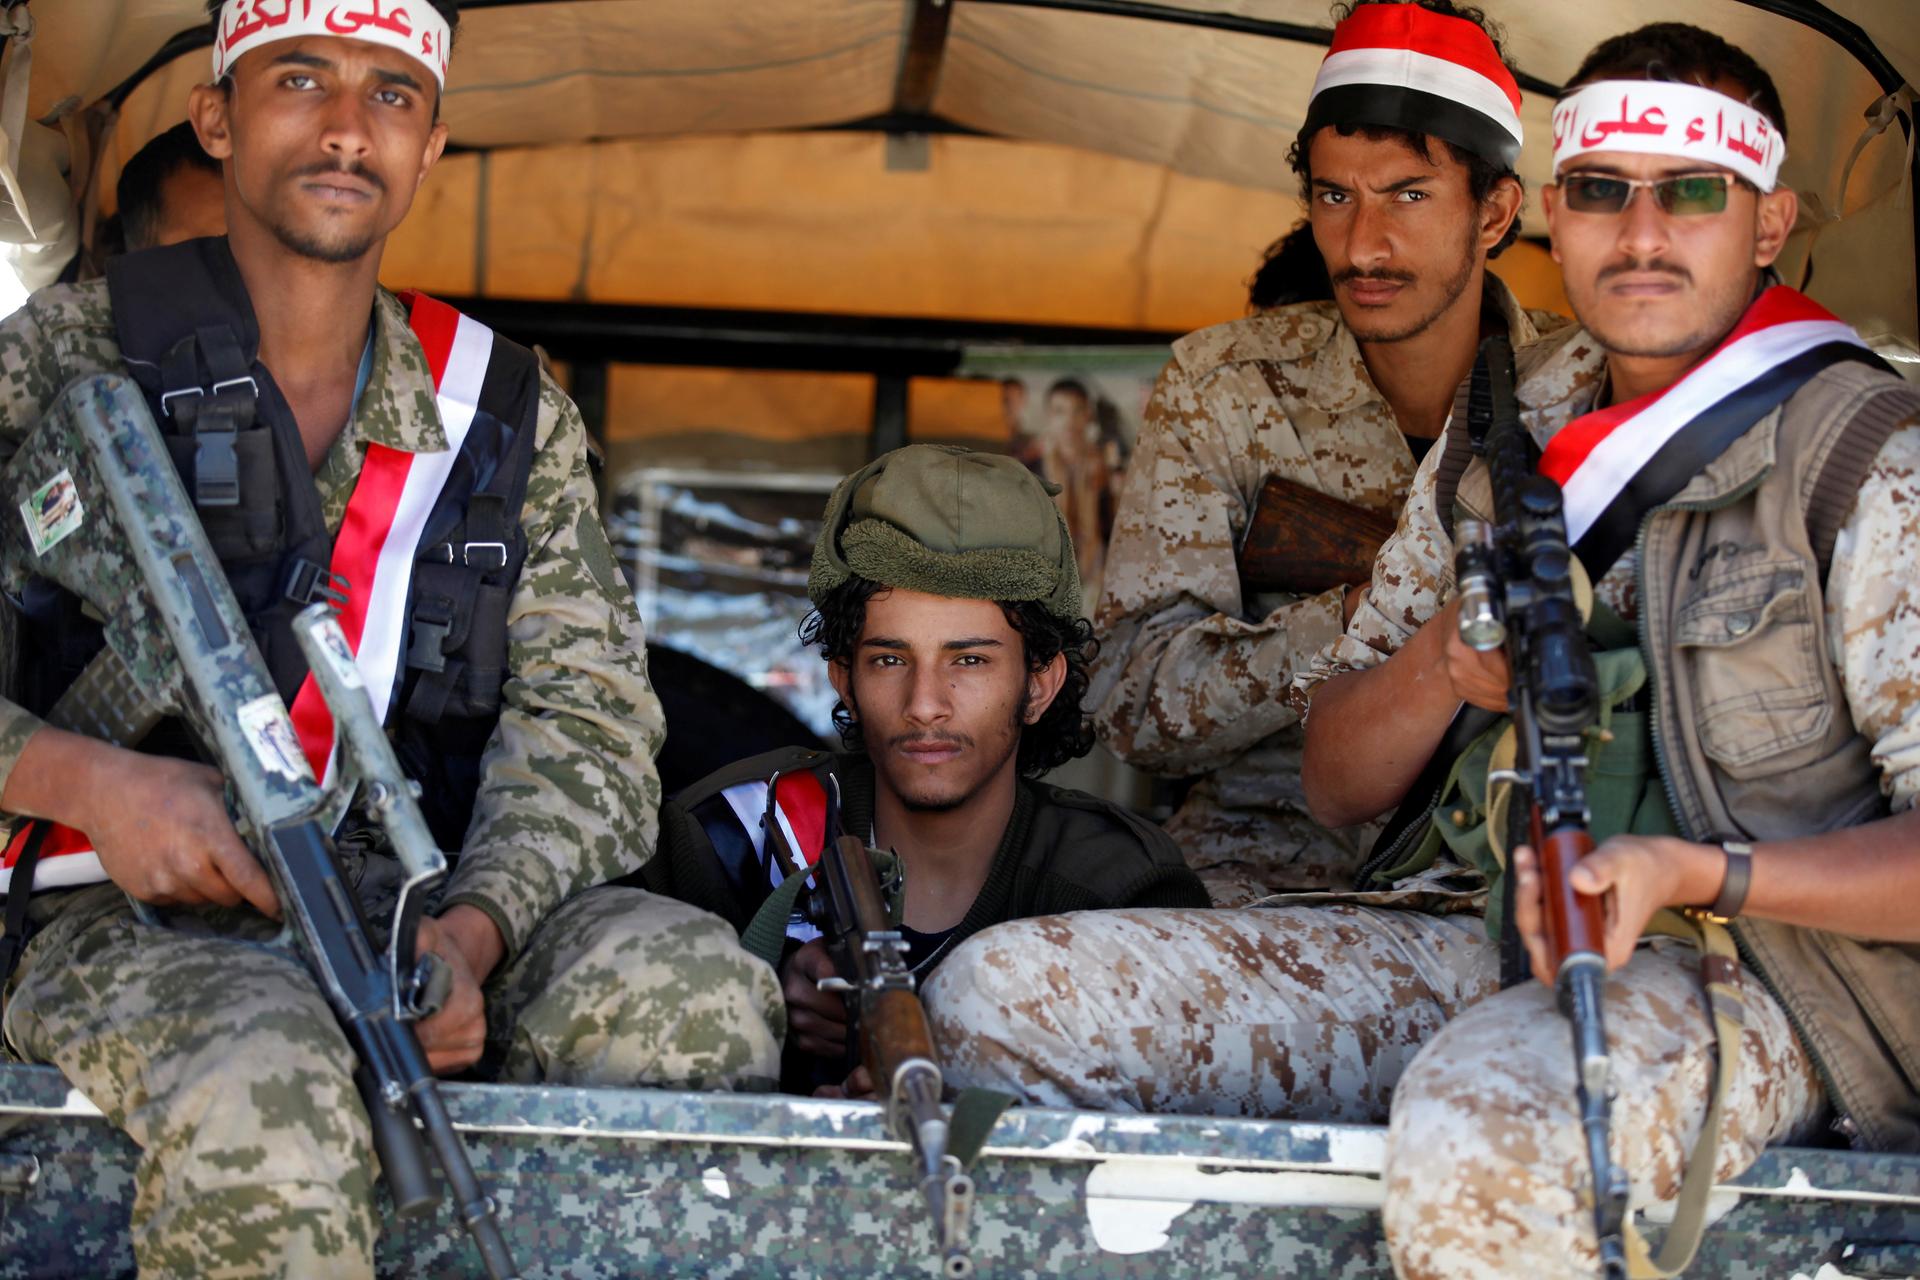 Newly recruited Houthi fighters ride on the back of a pick-up truck